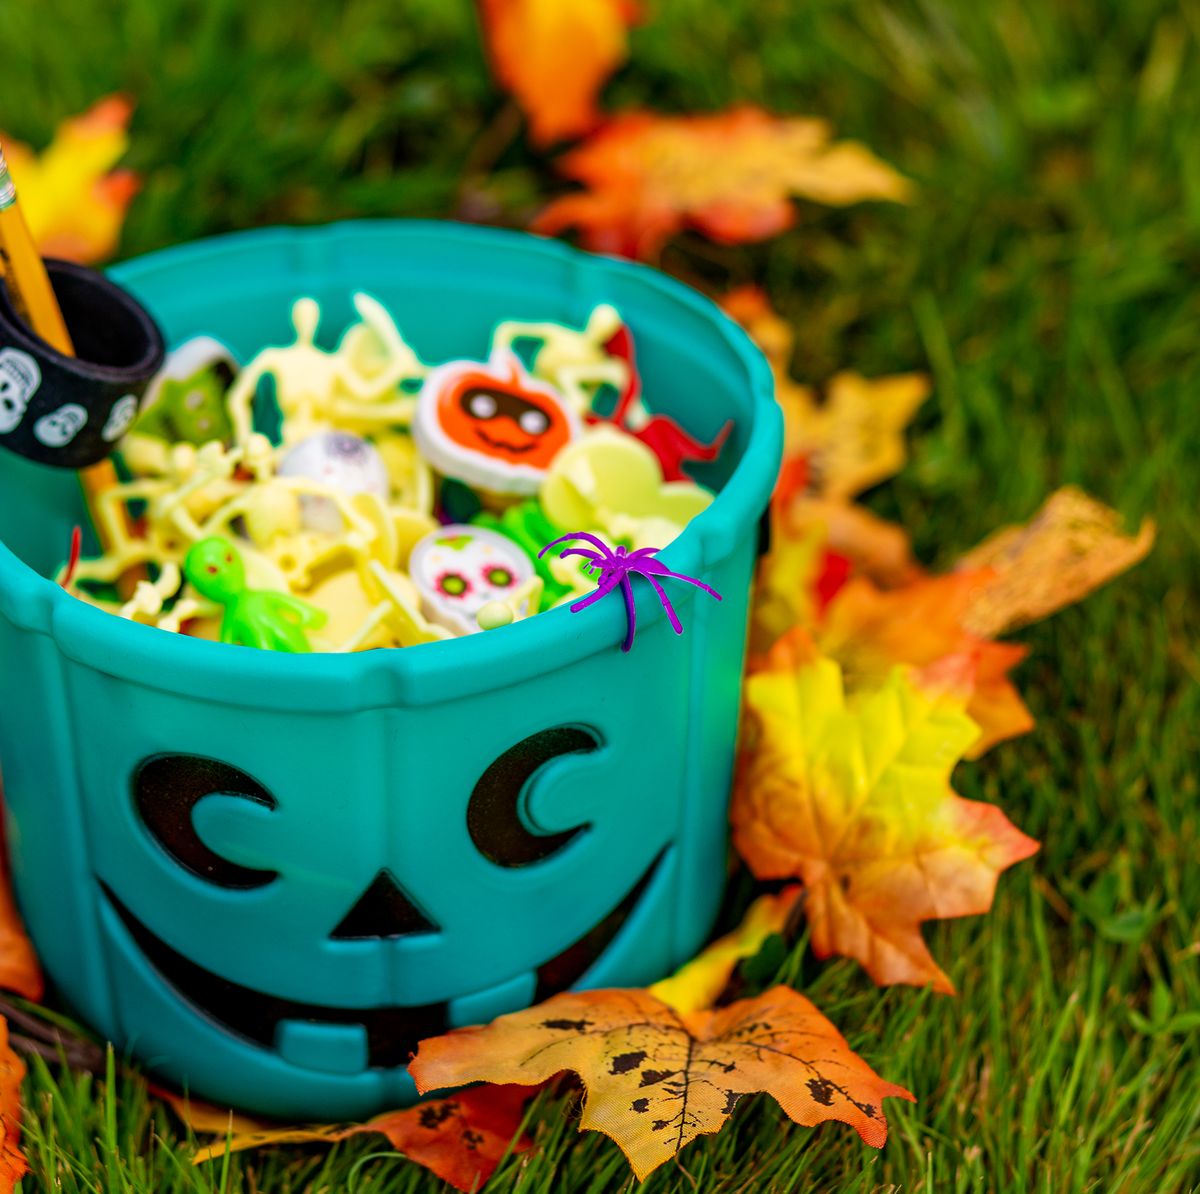 https://hips.hearstapps.com/hmg-prod/images/halloween-teal-basket-full-of-non-food-treats-royalty-free-image-1625930137.jpg?crop=0.670xw:1.00xh;0.0609xw,0&resize=1200:*